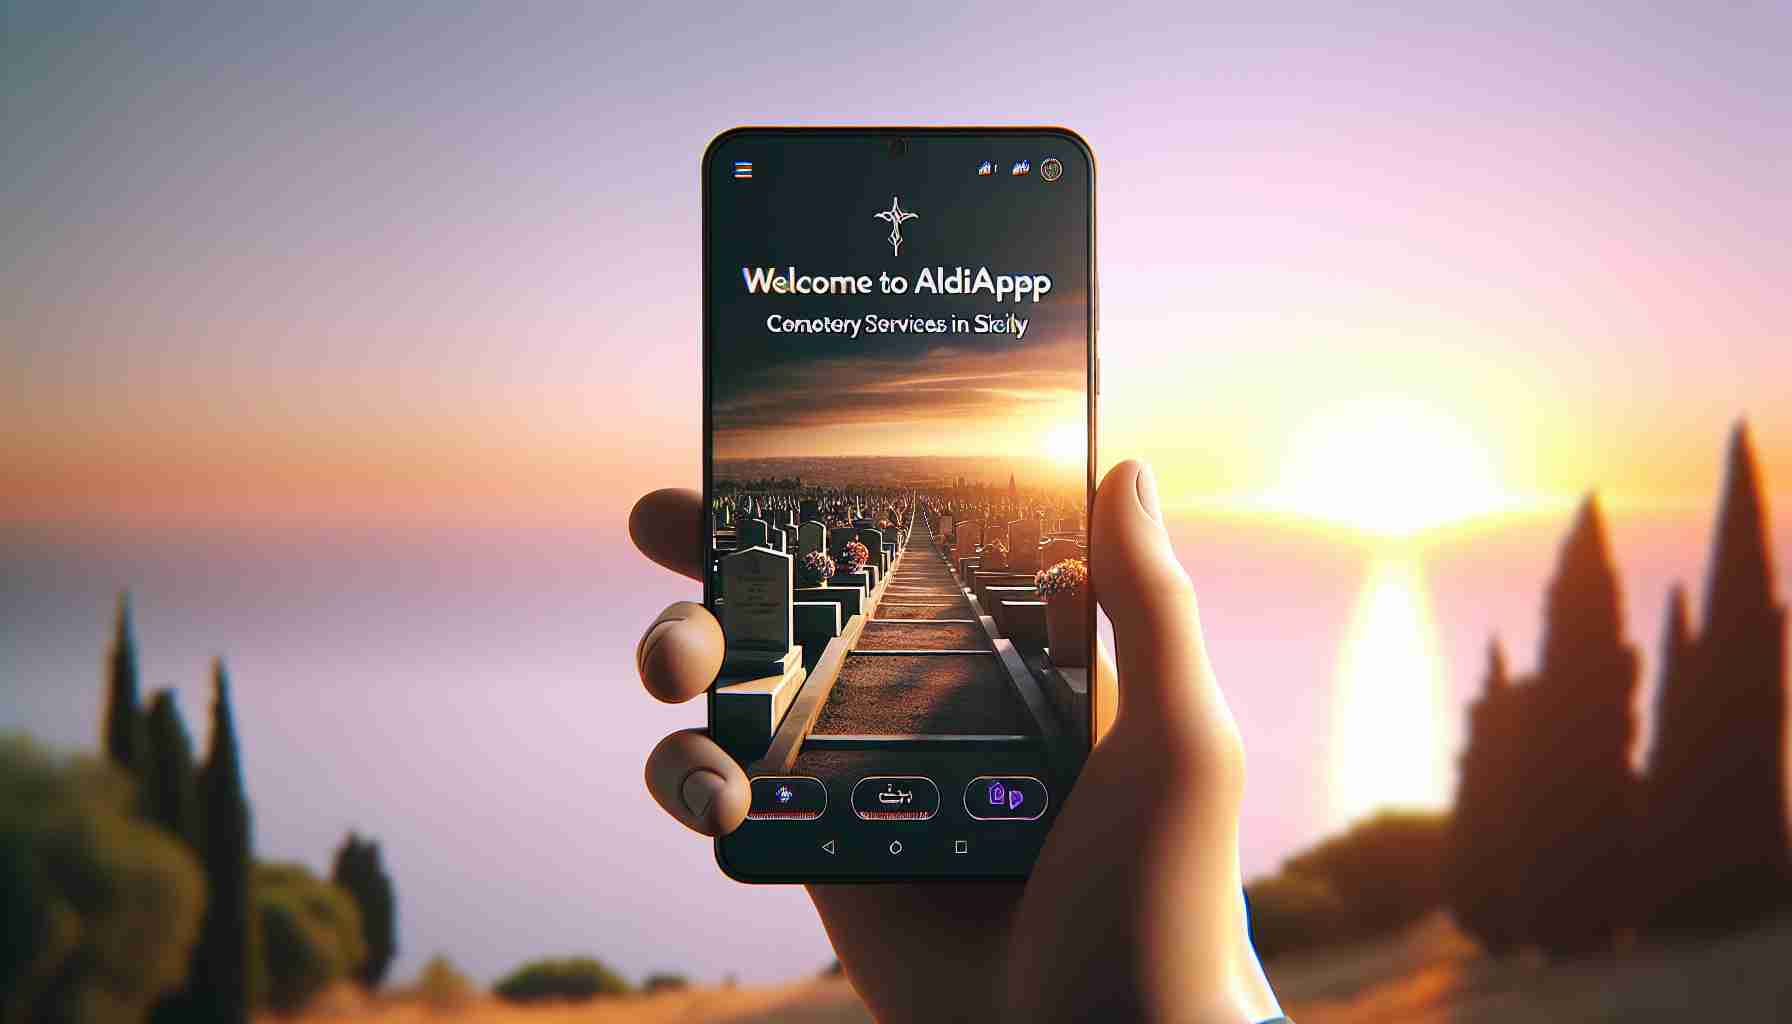 Introducing Aldilapp: Sicily Welcomes a New Cemetery Services App